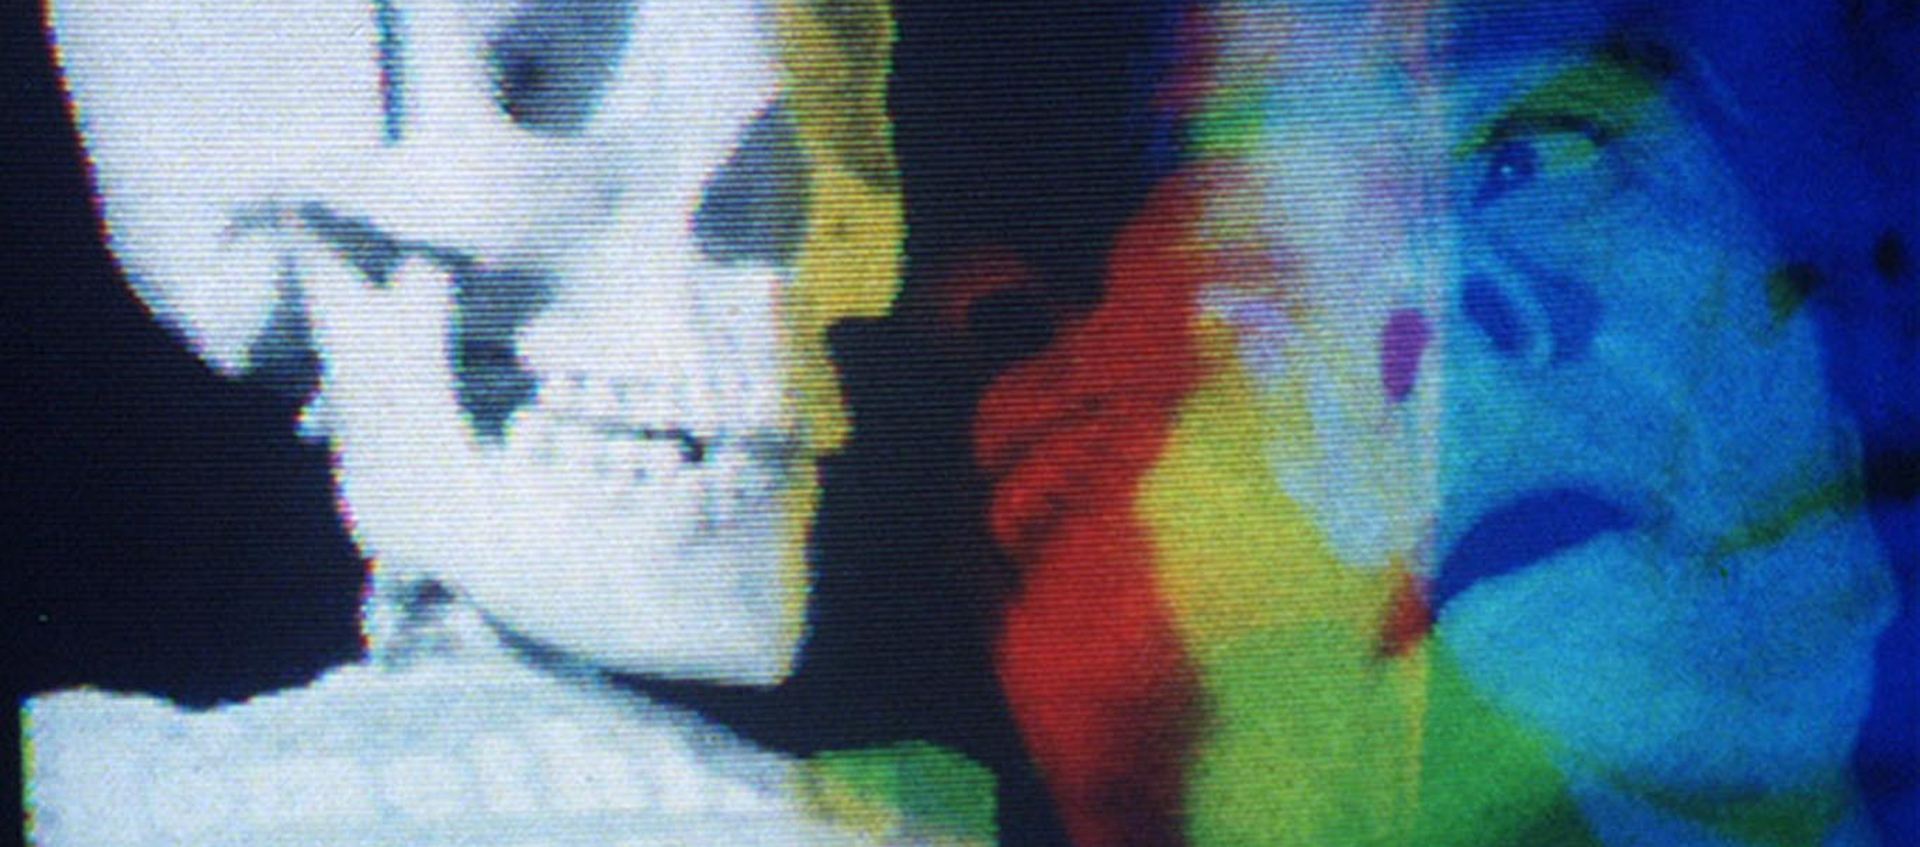 A distorted, multicolored image of a skeleton on the left and Barbara Hammer, who appears in multiple exposures and colors, on the right.